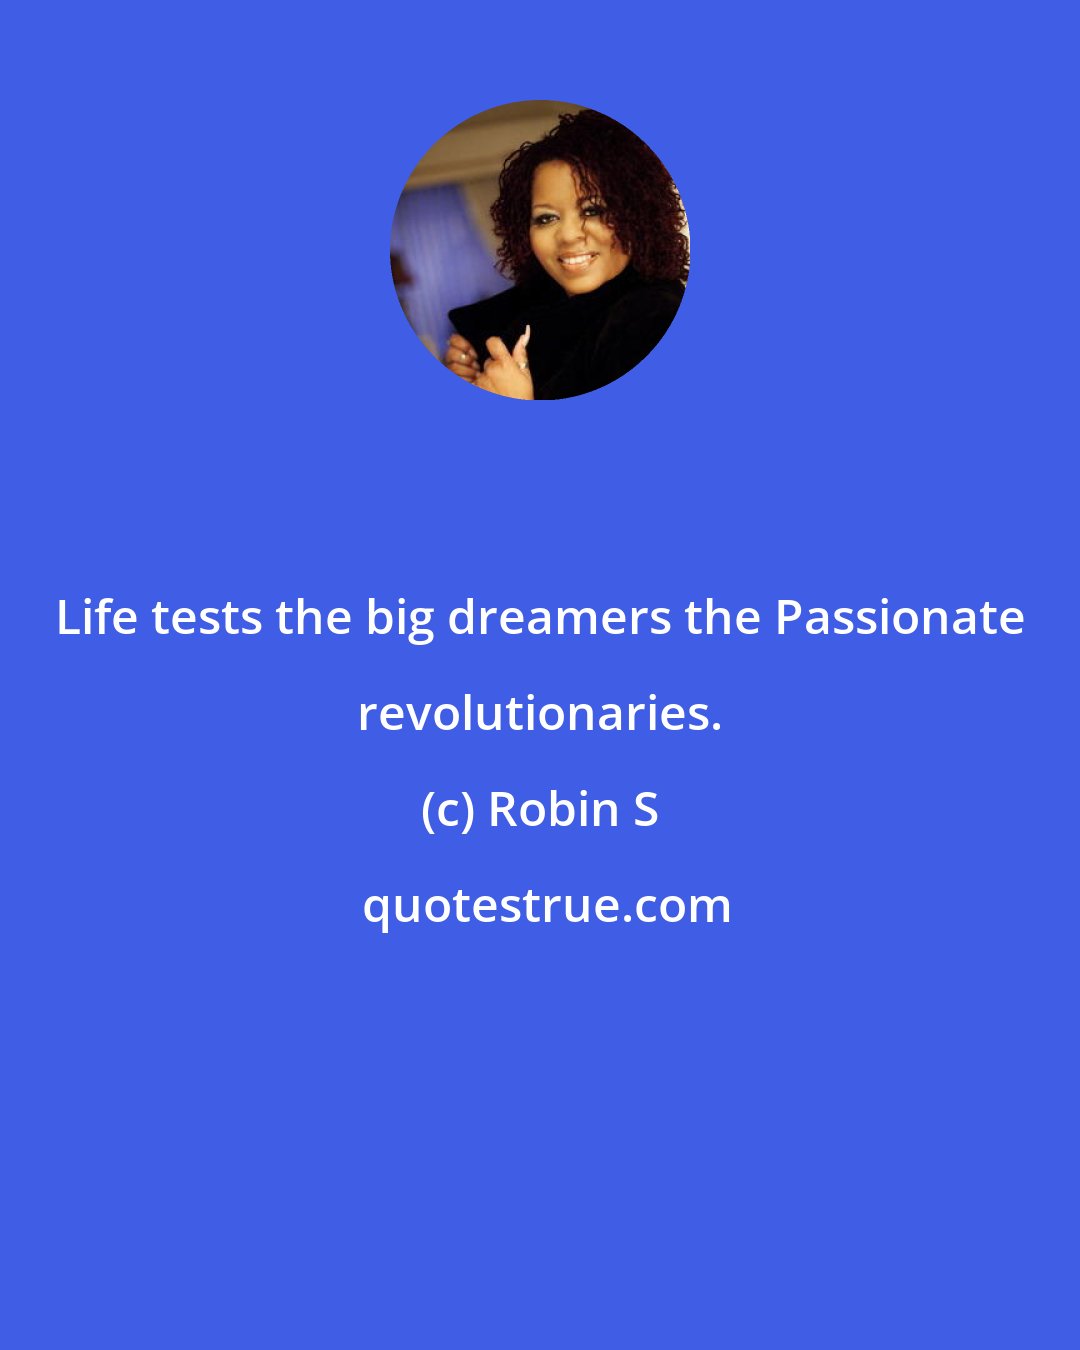 Robin S: Life tests the big dreamers the Passionate revolutionaries.